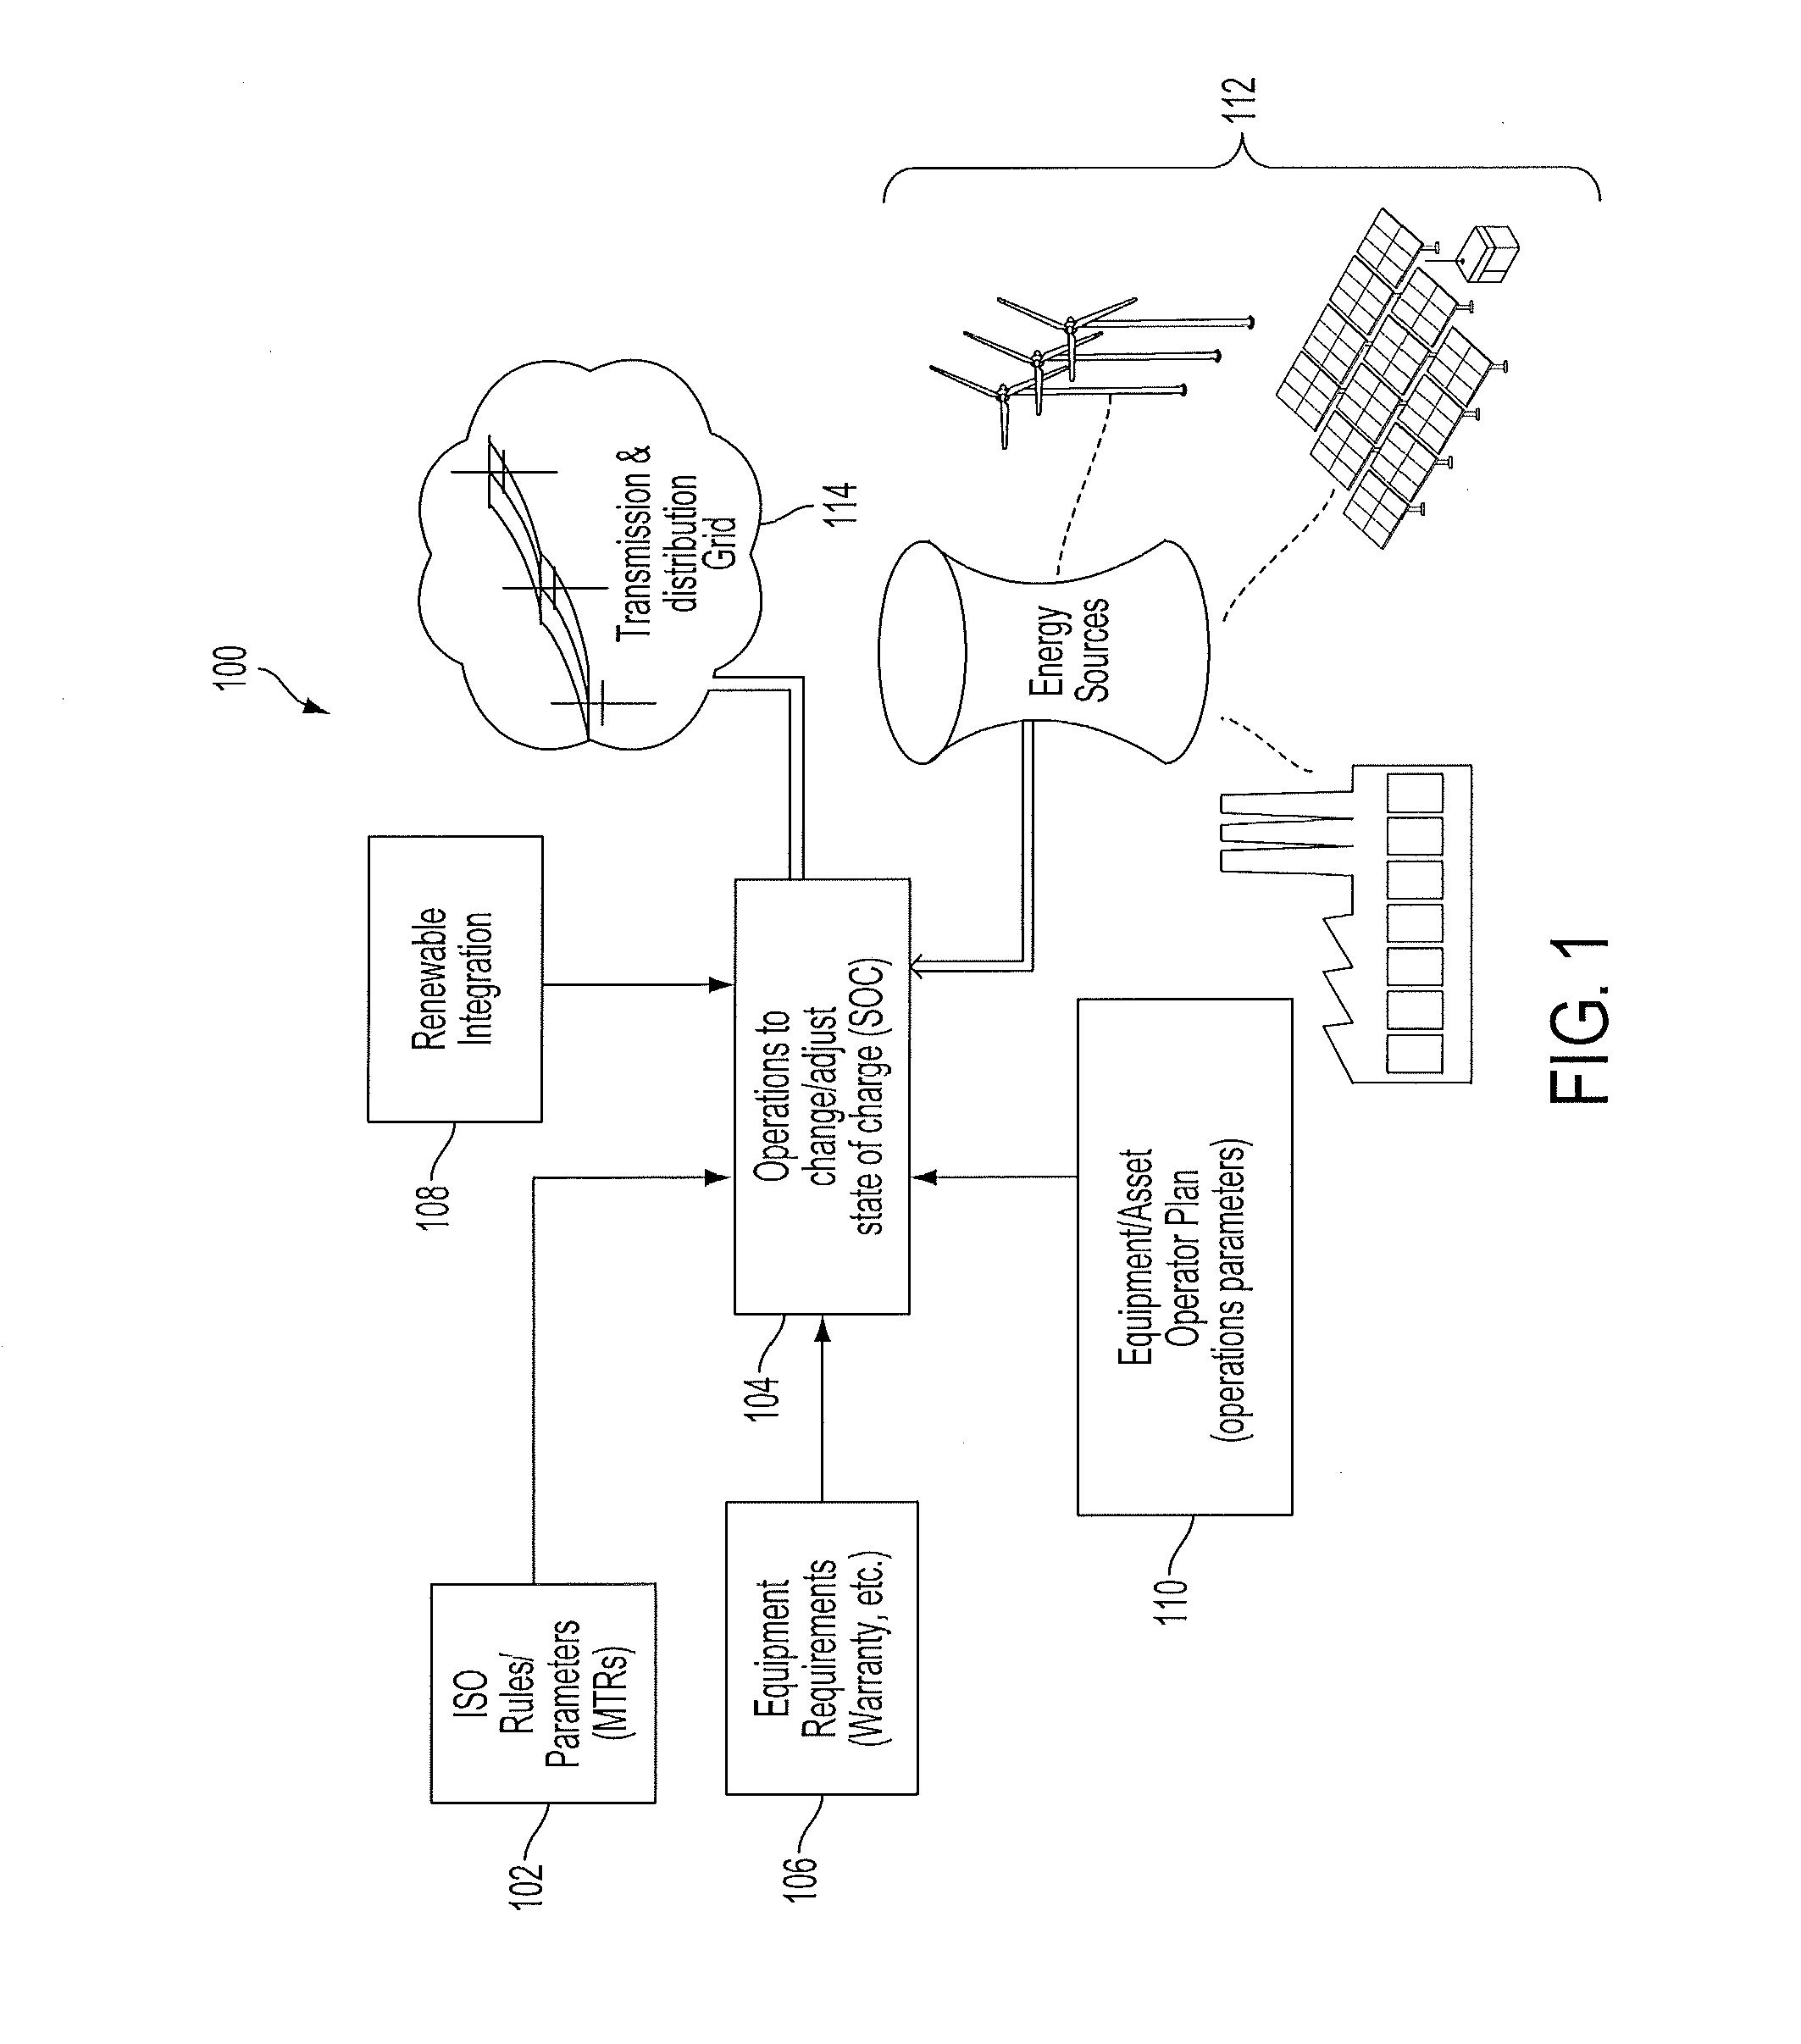 Method and system for performance management of an energy storage device